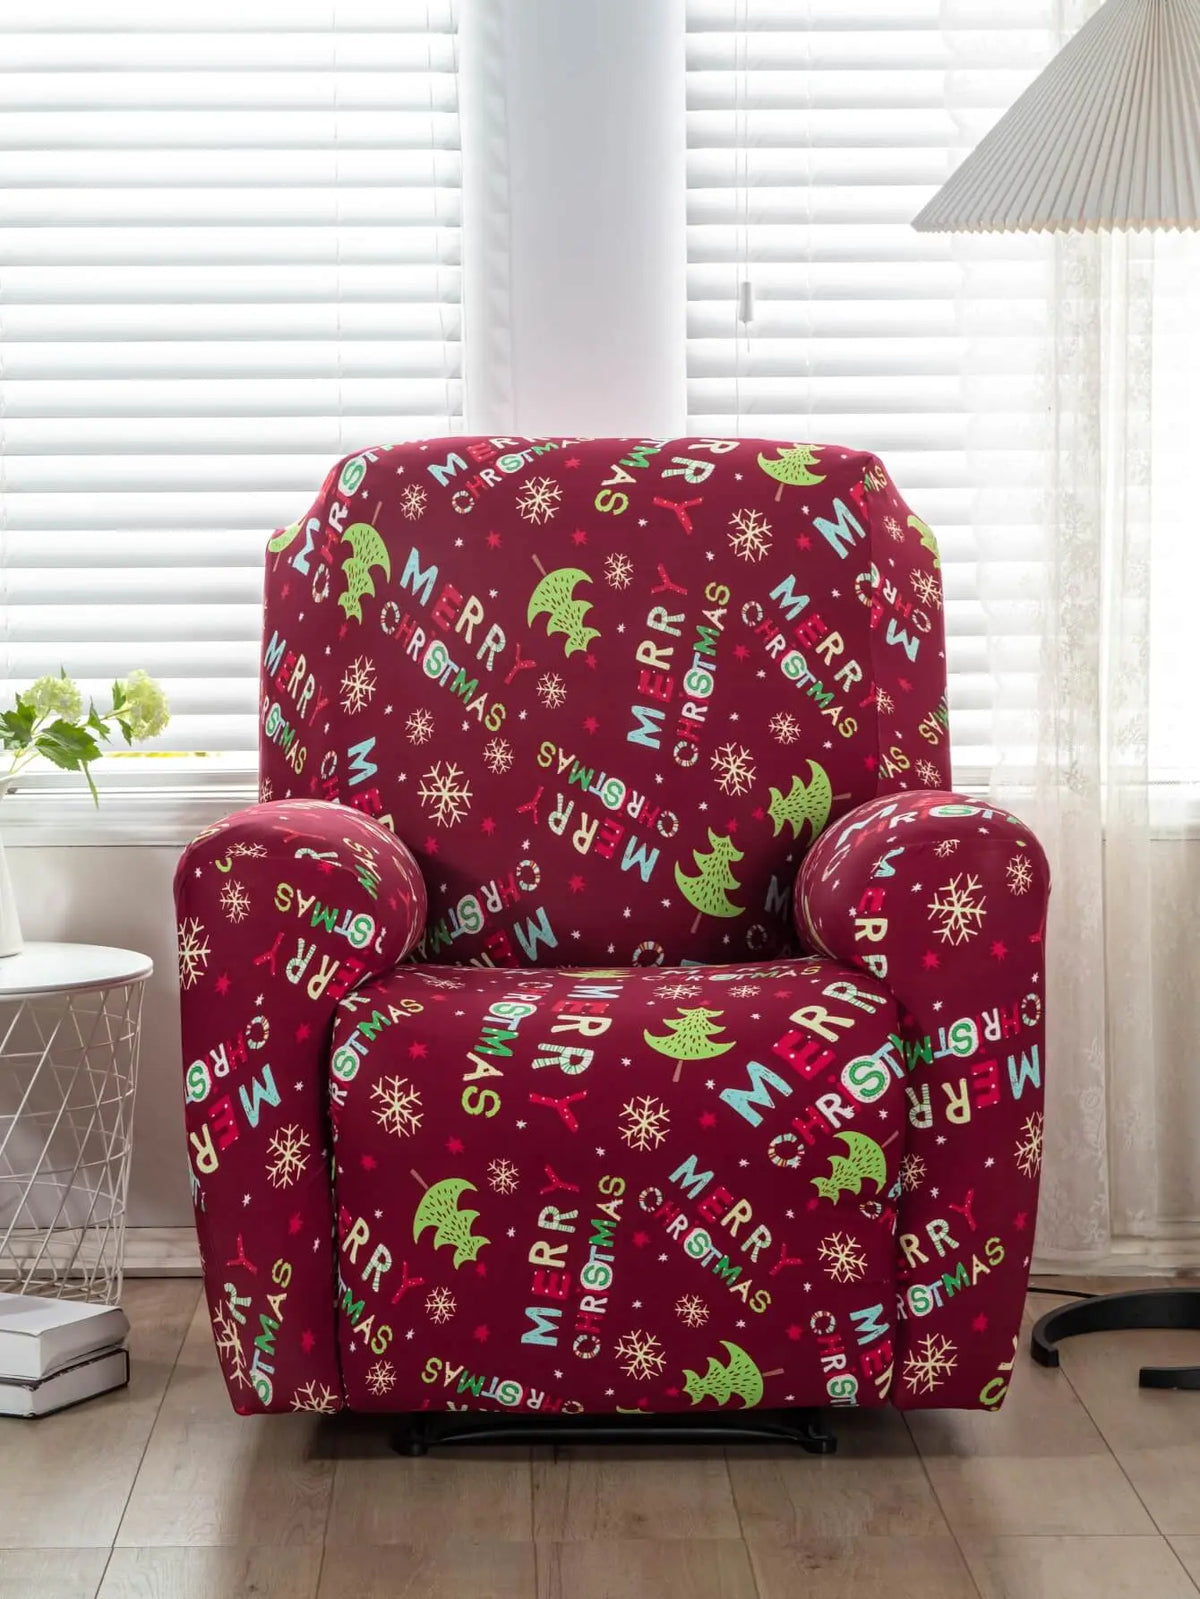 Xmas Printed Lazy Boy Chair Covers with Side Pocket Crfatop %sku%